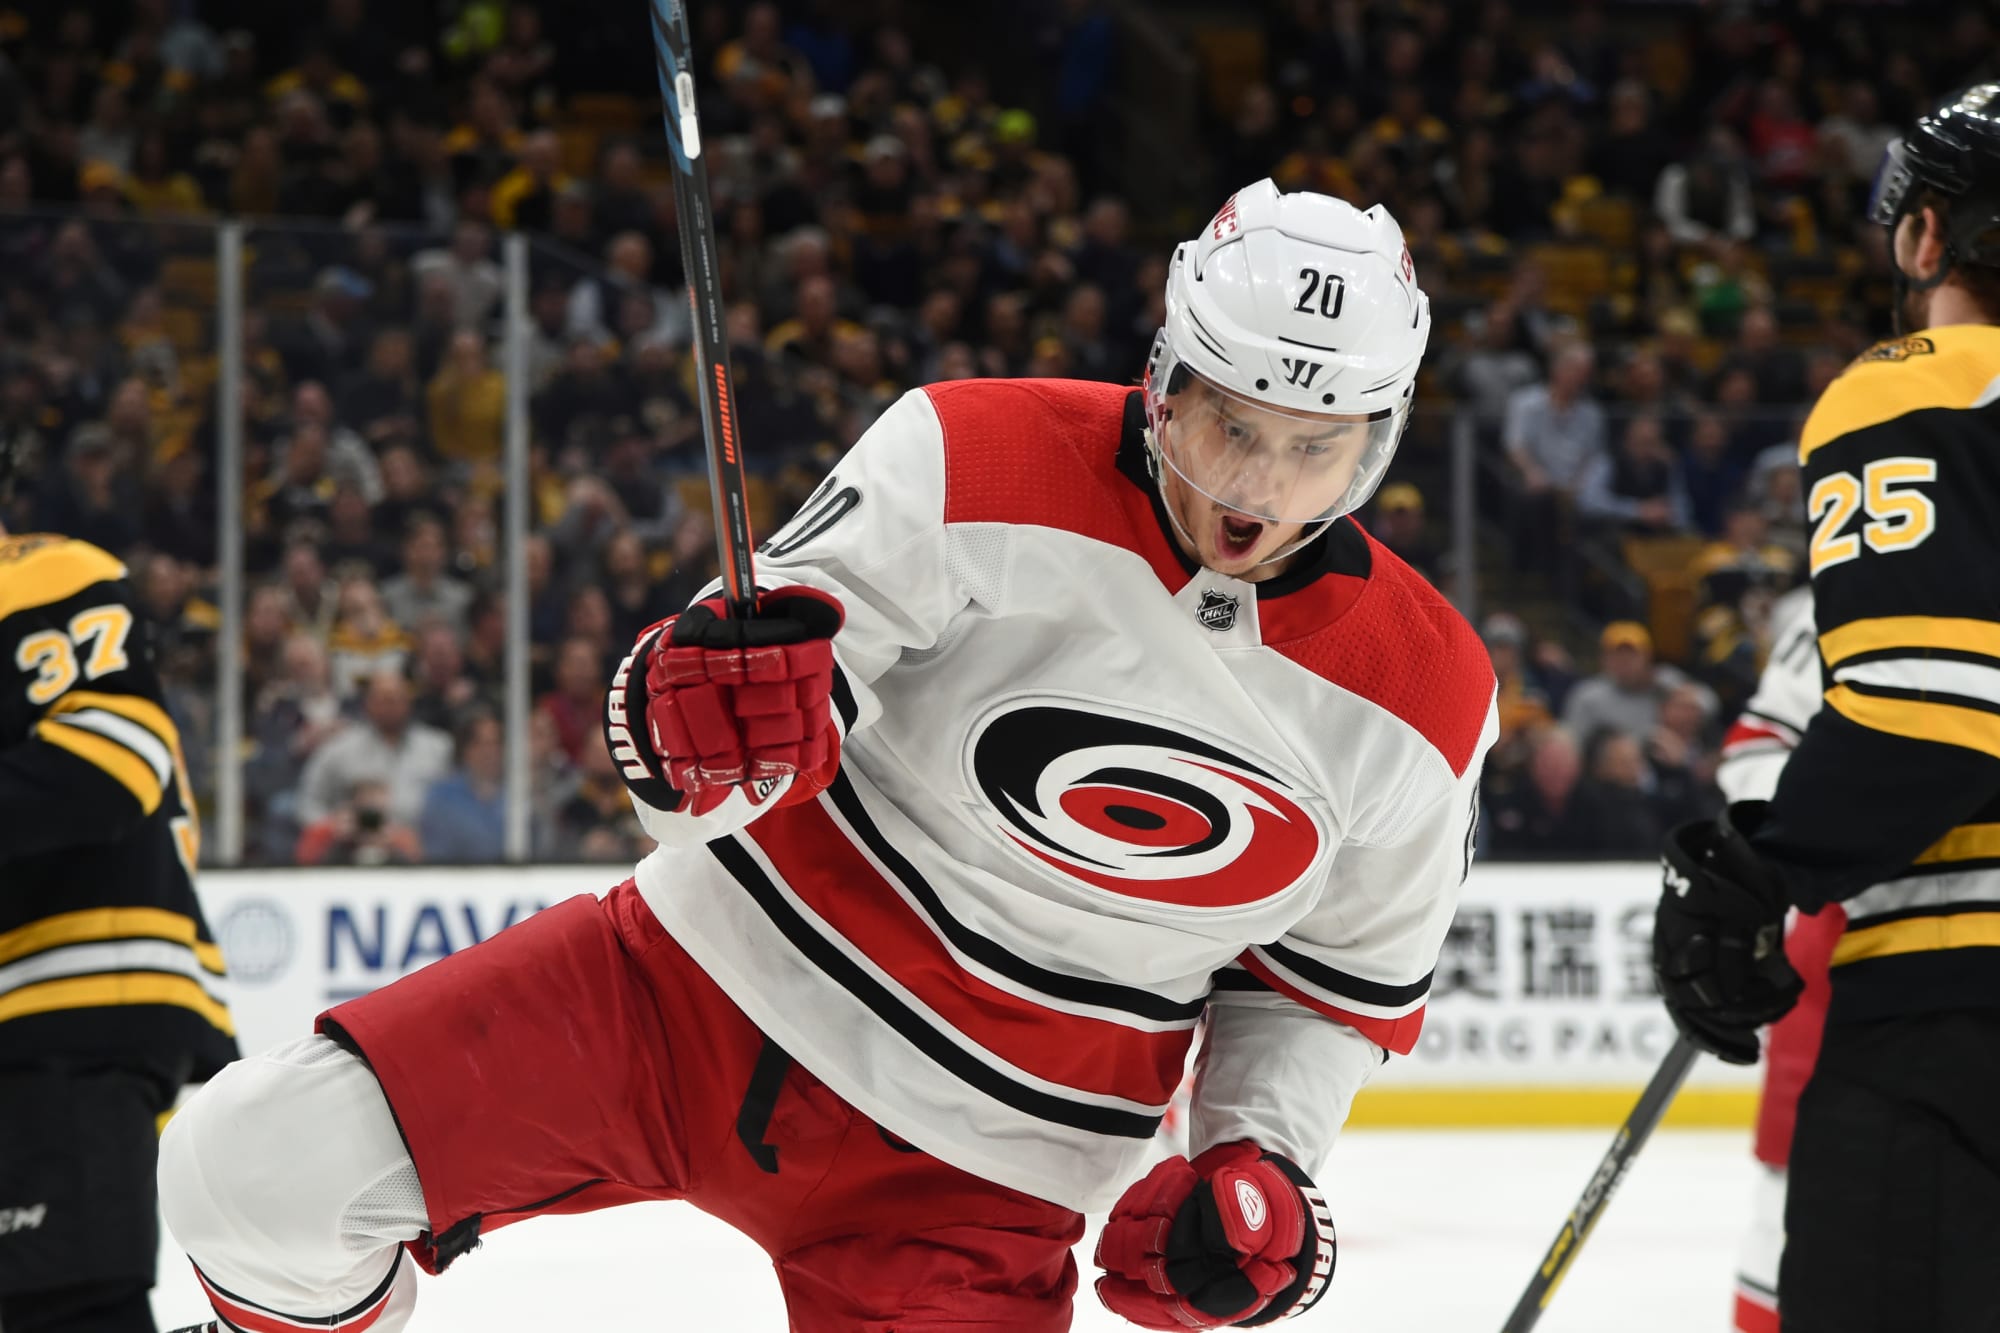  Carolina Hurricanes unveil new road jersey for 2019-20